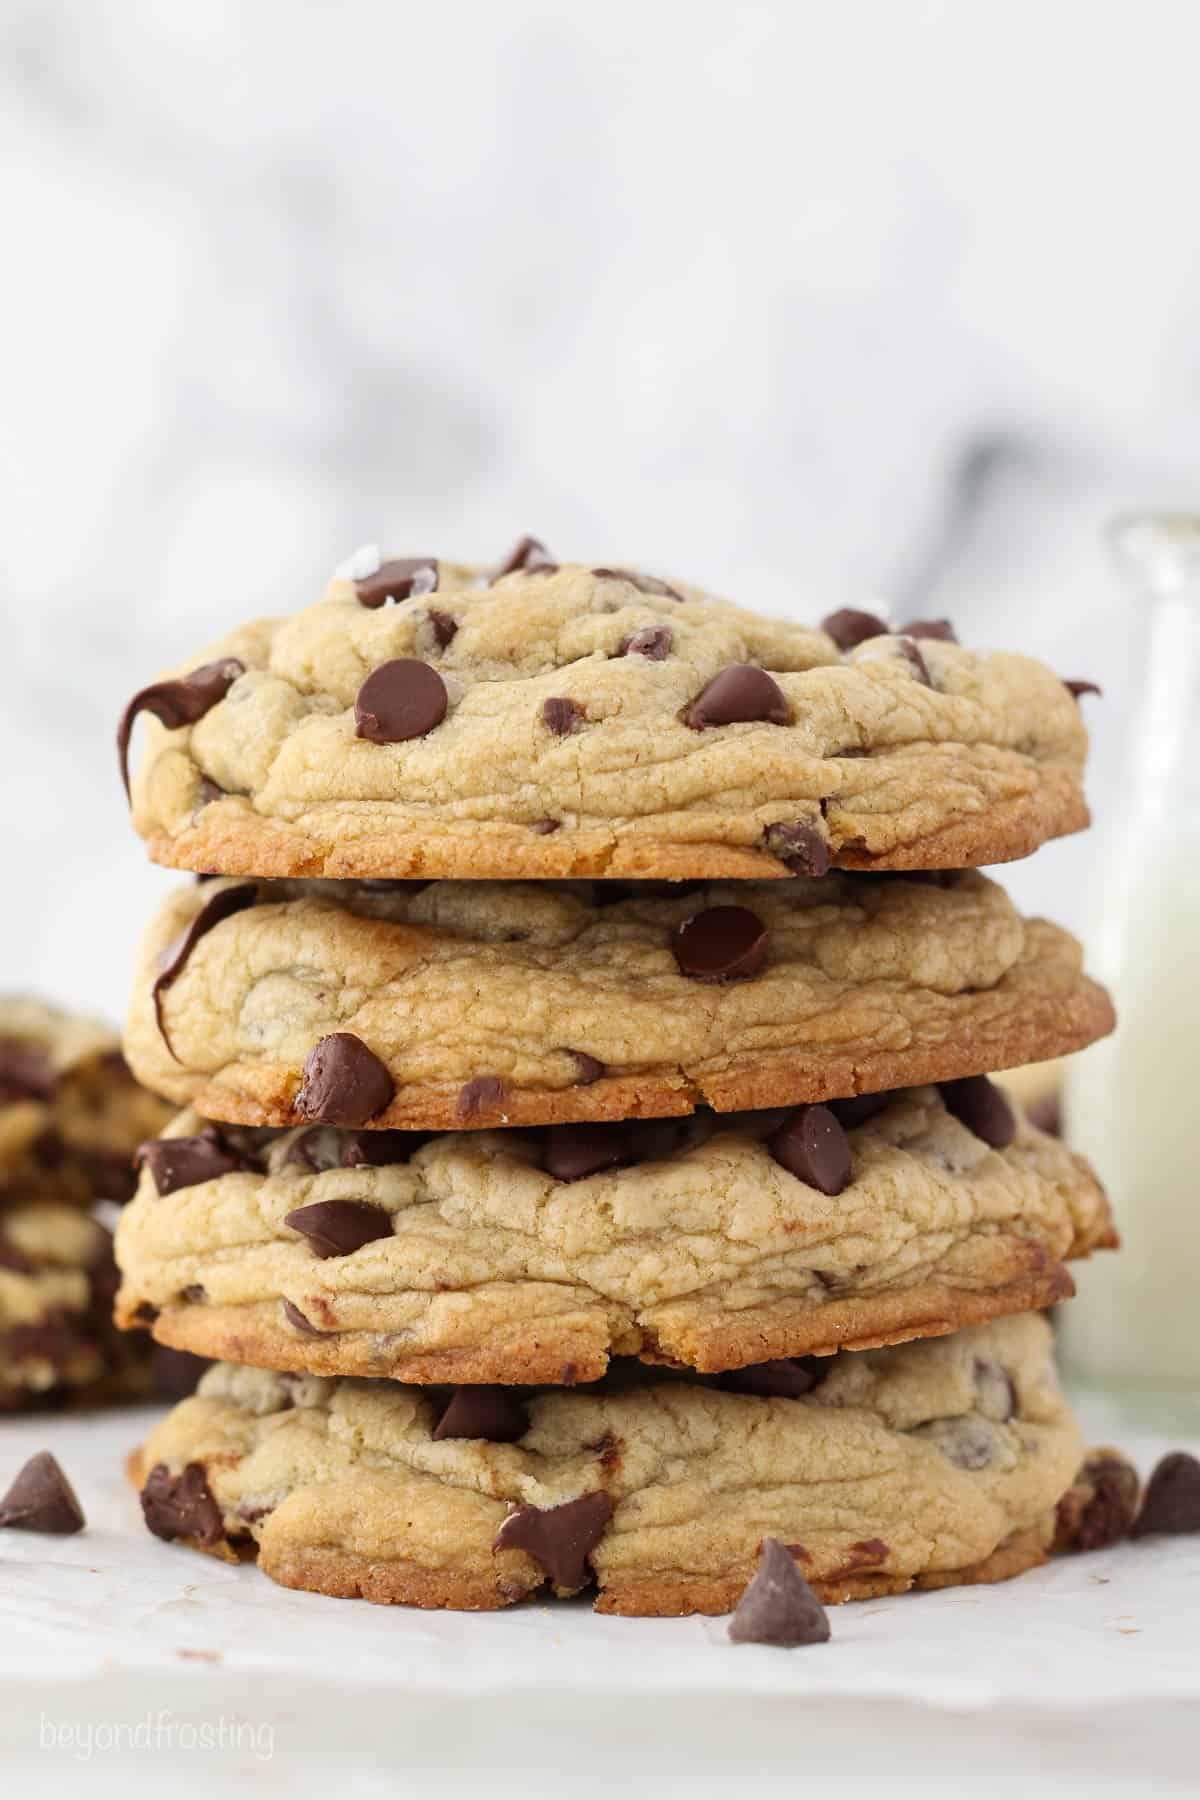 Four large thick chocolate chip cookies stacked on top of each other